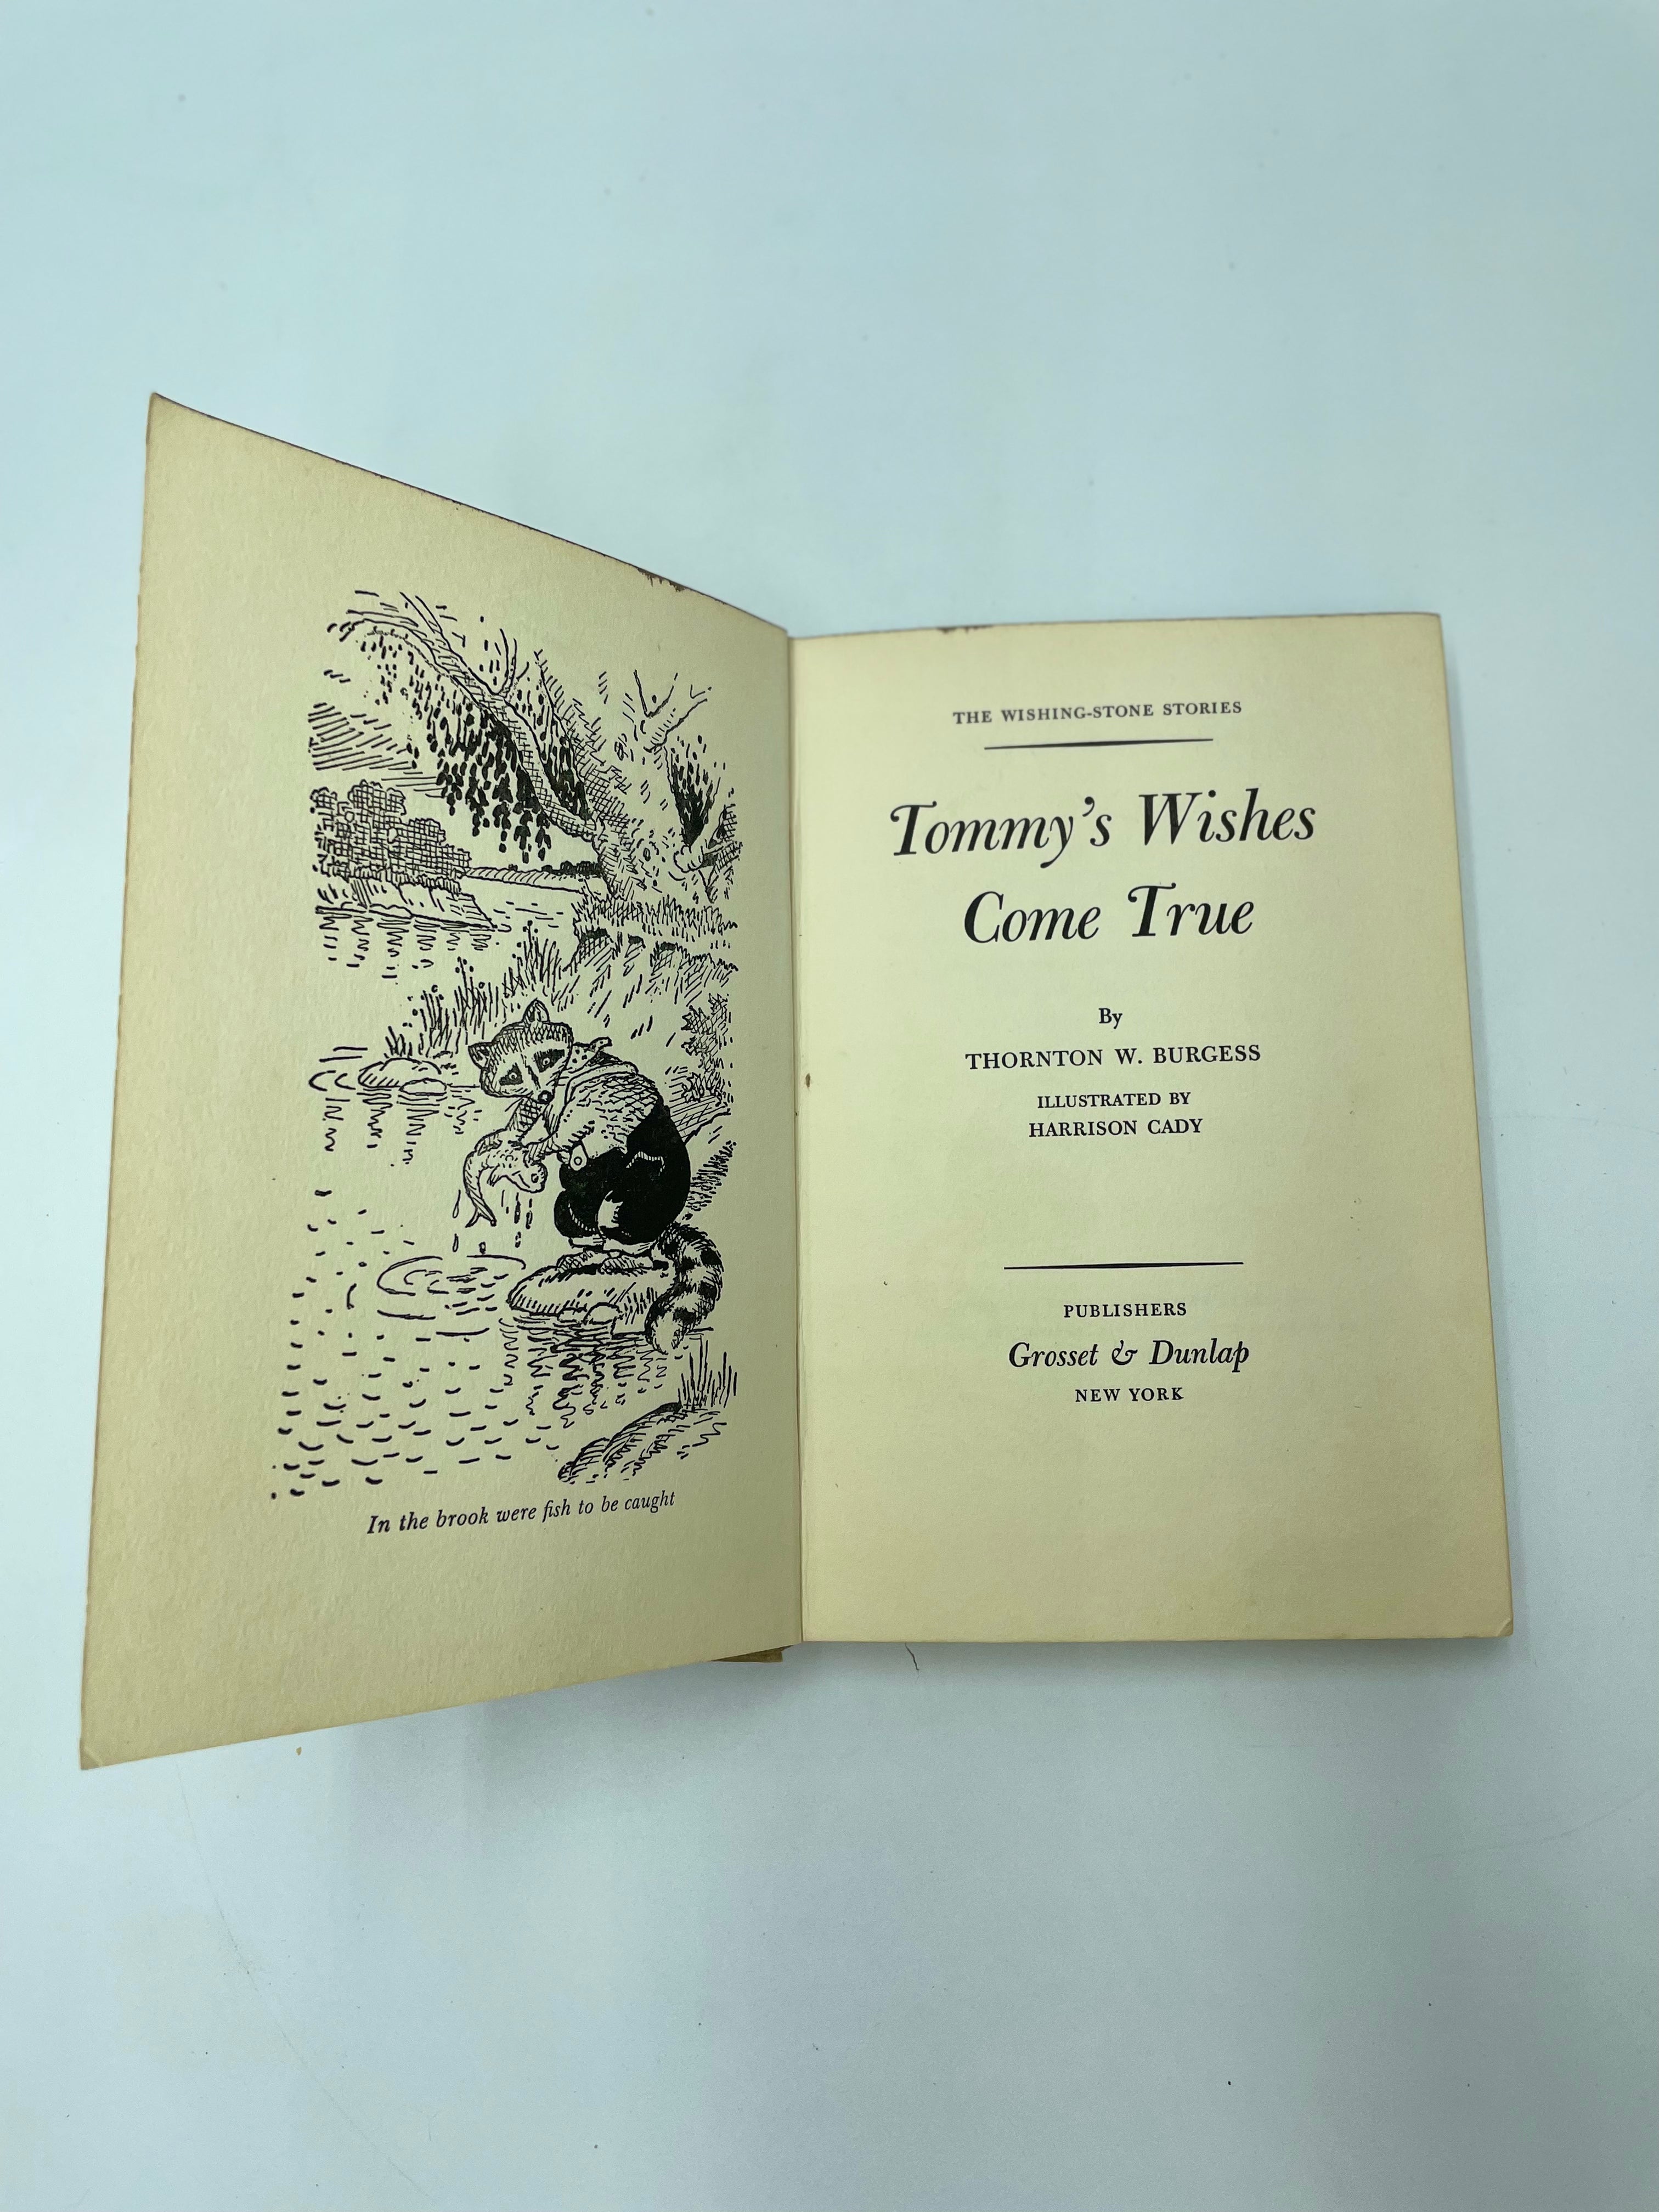 Tommy's Wishes Come True Published by Grosset & Dunlap, 1921